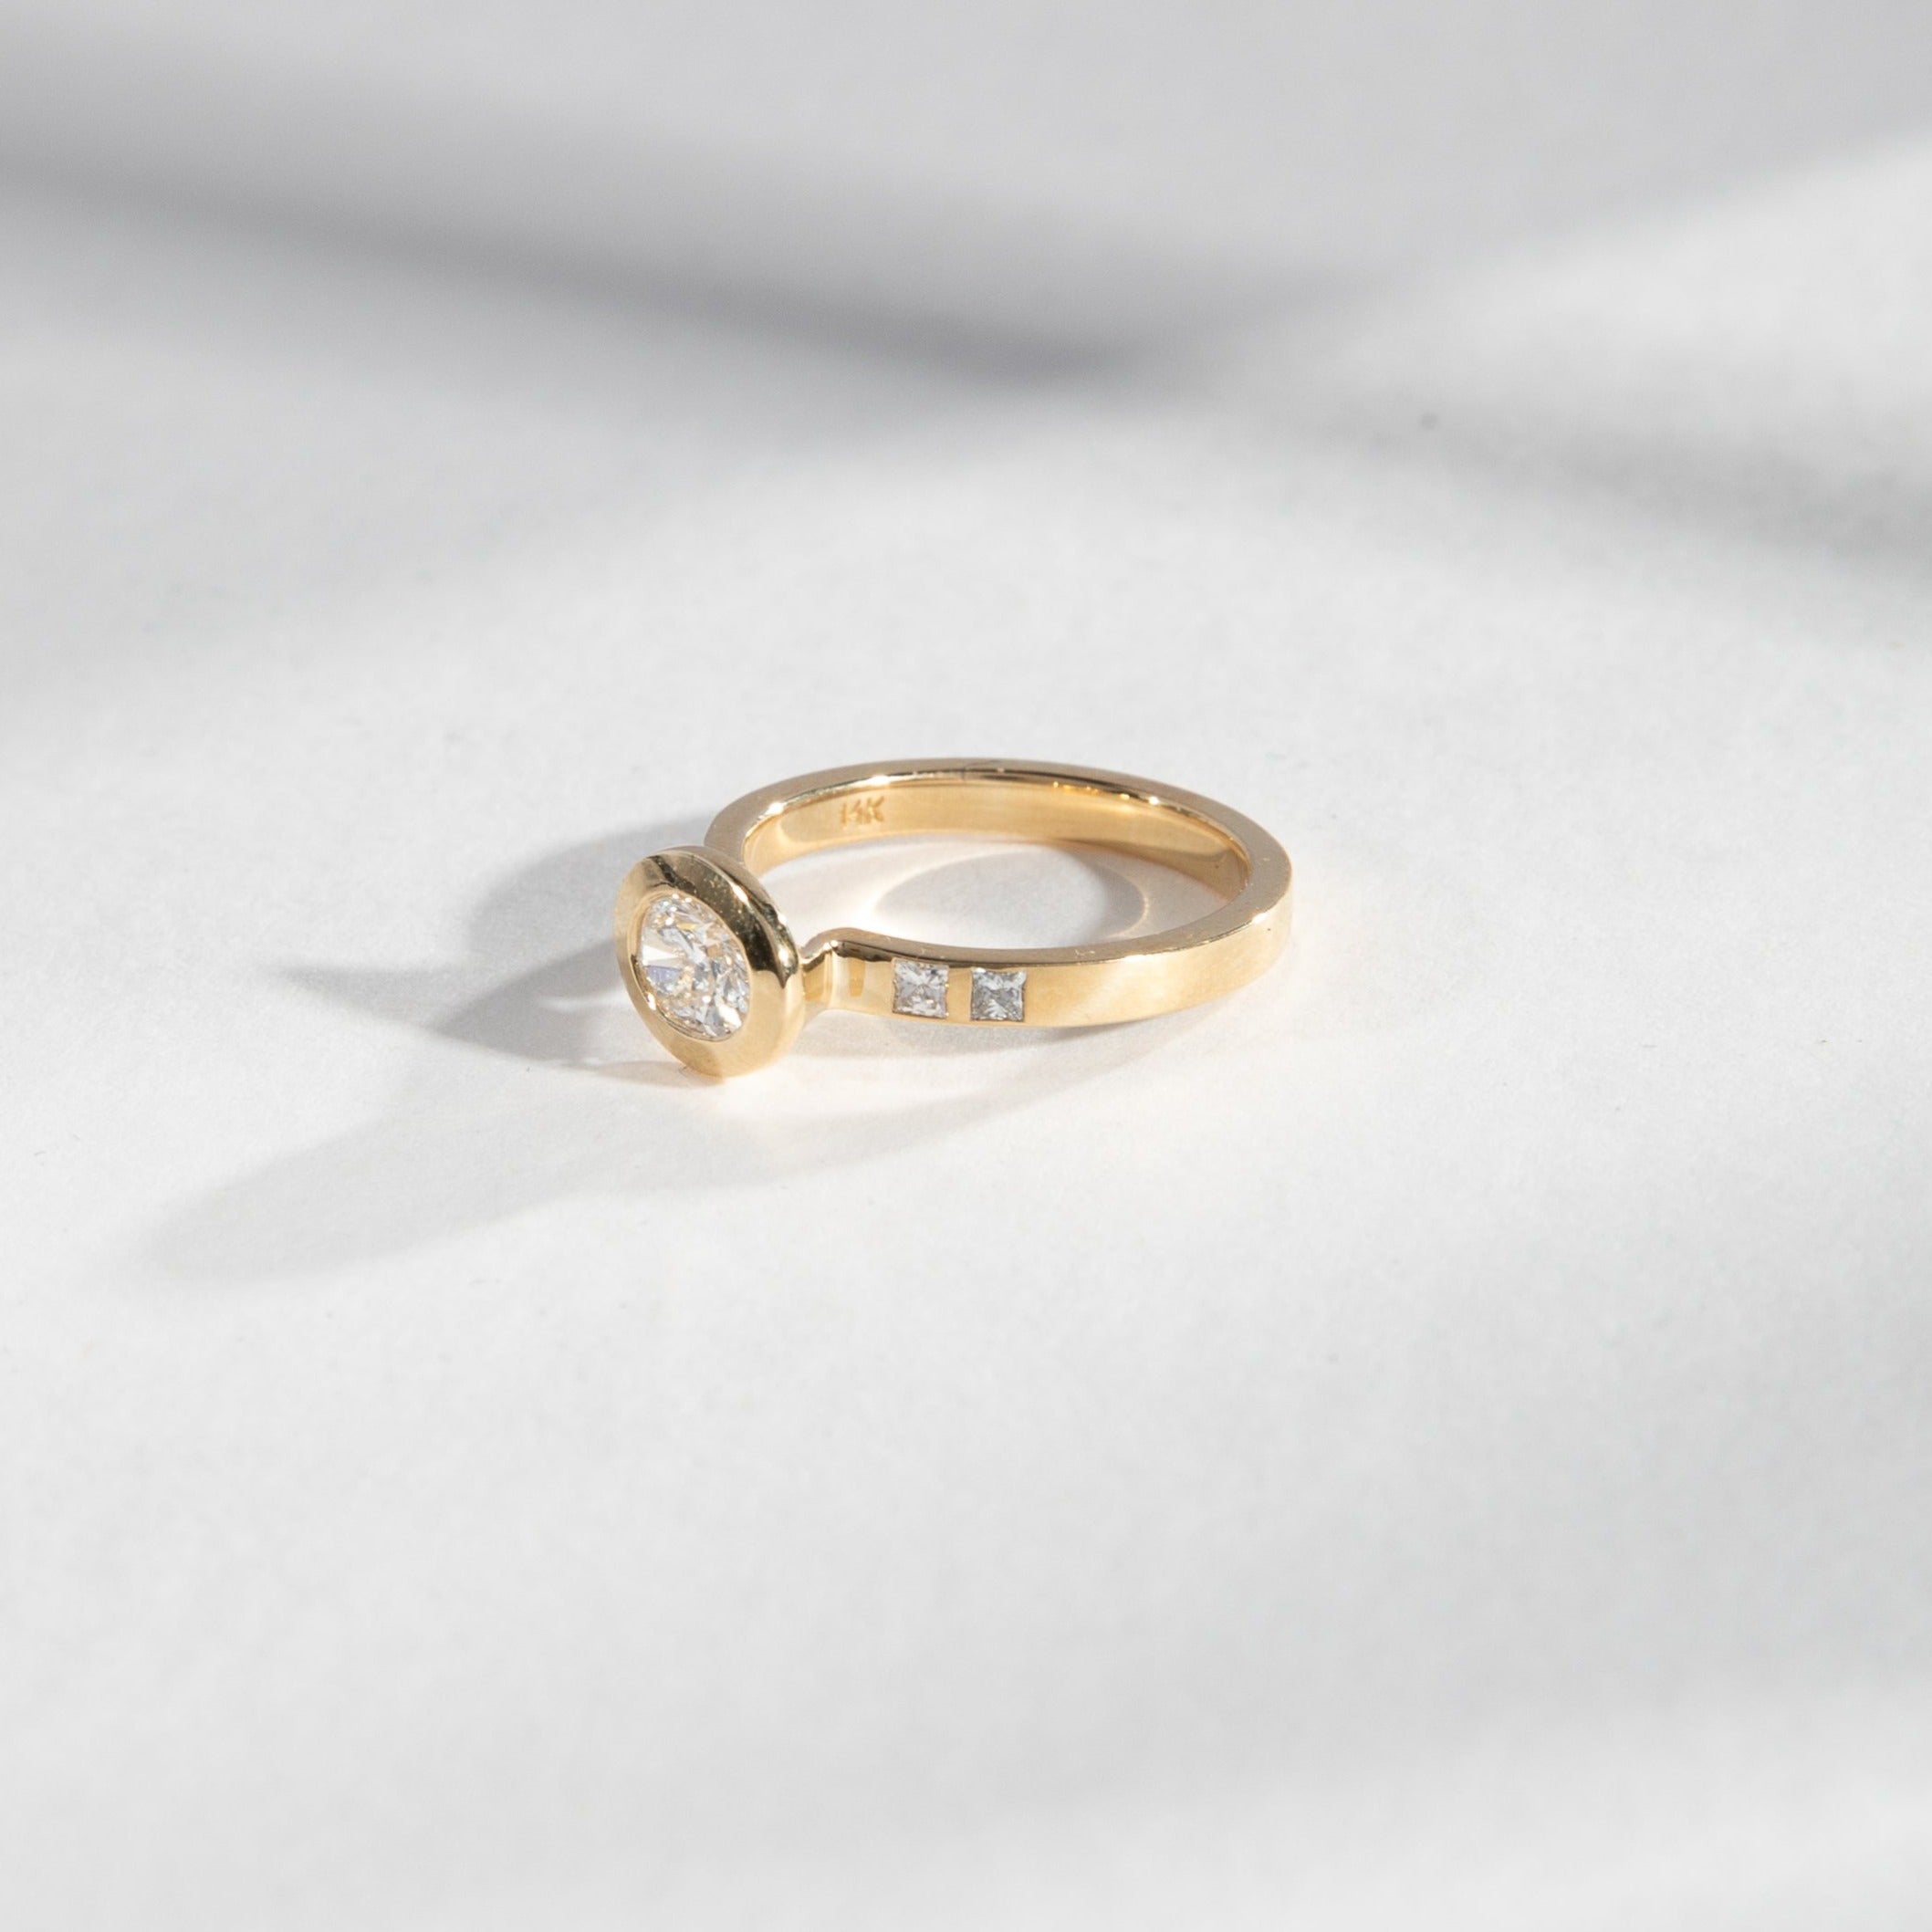 Delicate Vilti Ring in 14 Karat Yellow Gold with F-G Color VVS2-VS2 Clarity Lab-Grown Diamond and princess cut diamonds ethical made in NYC by SHW fine Jewelry